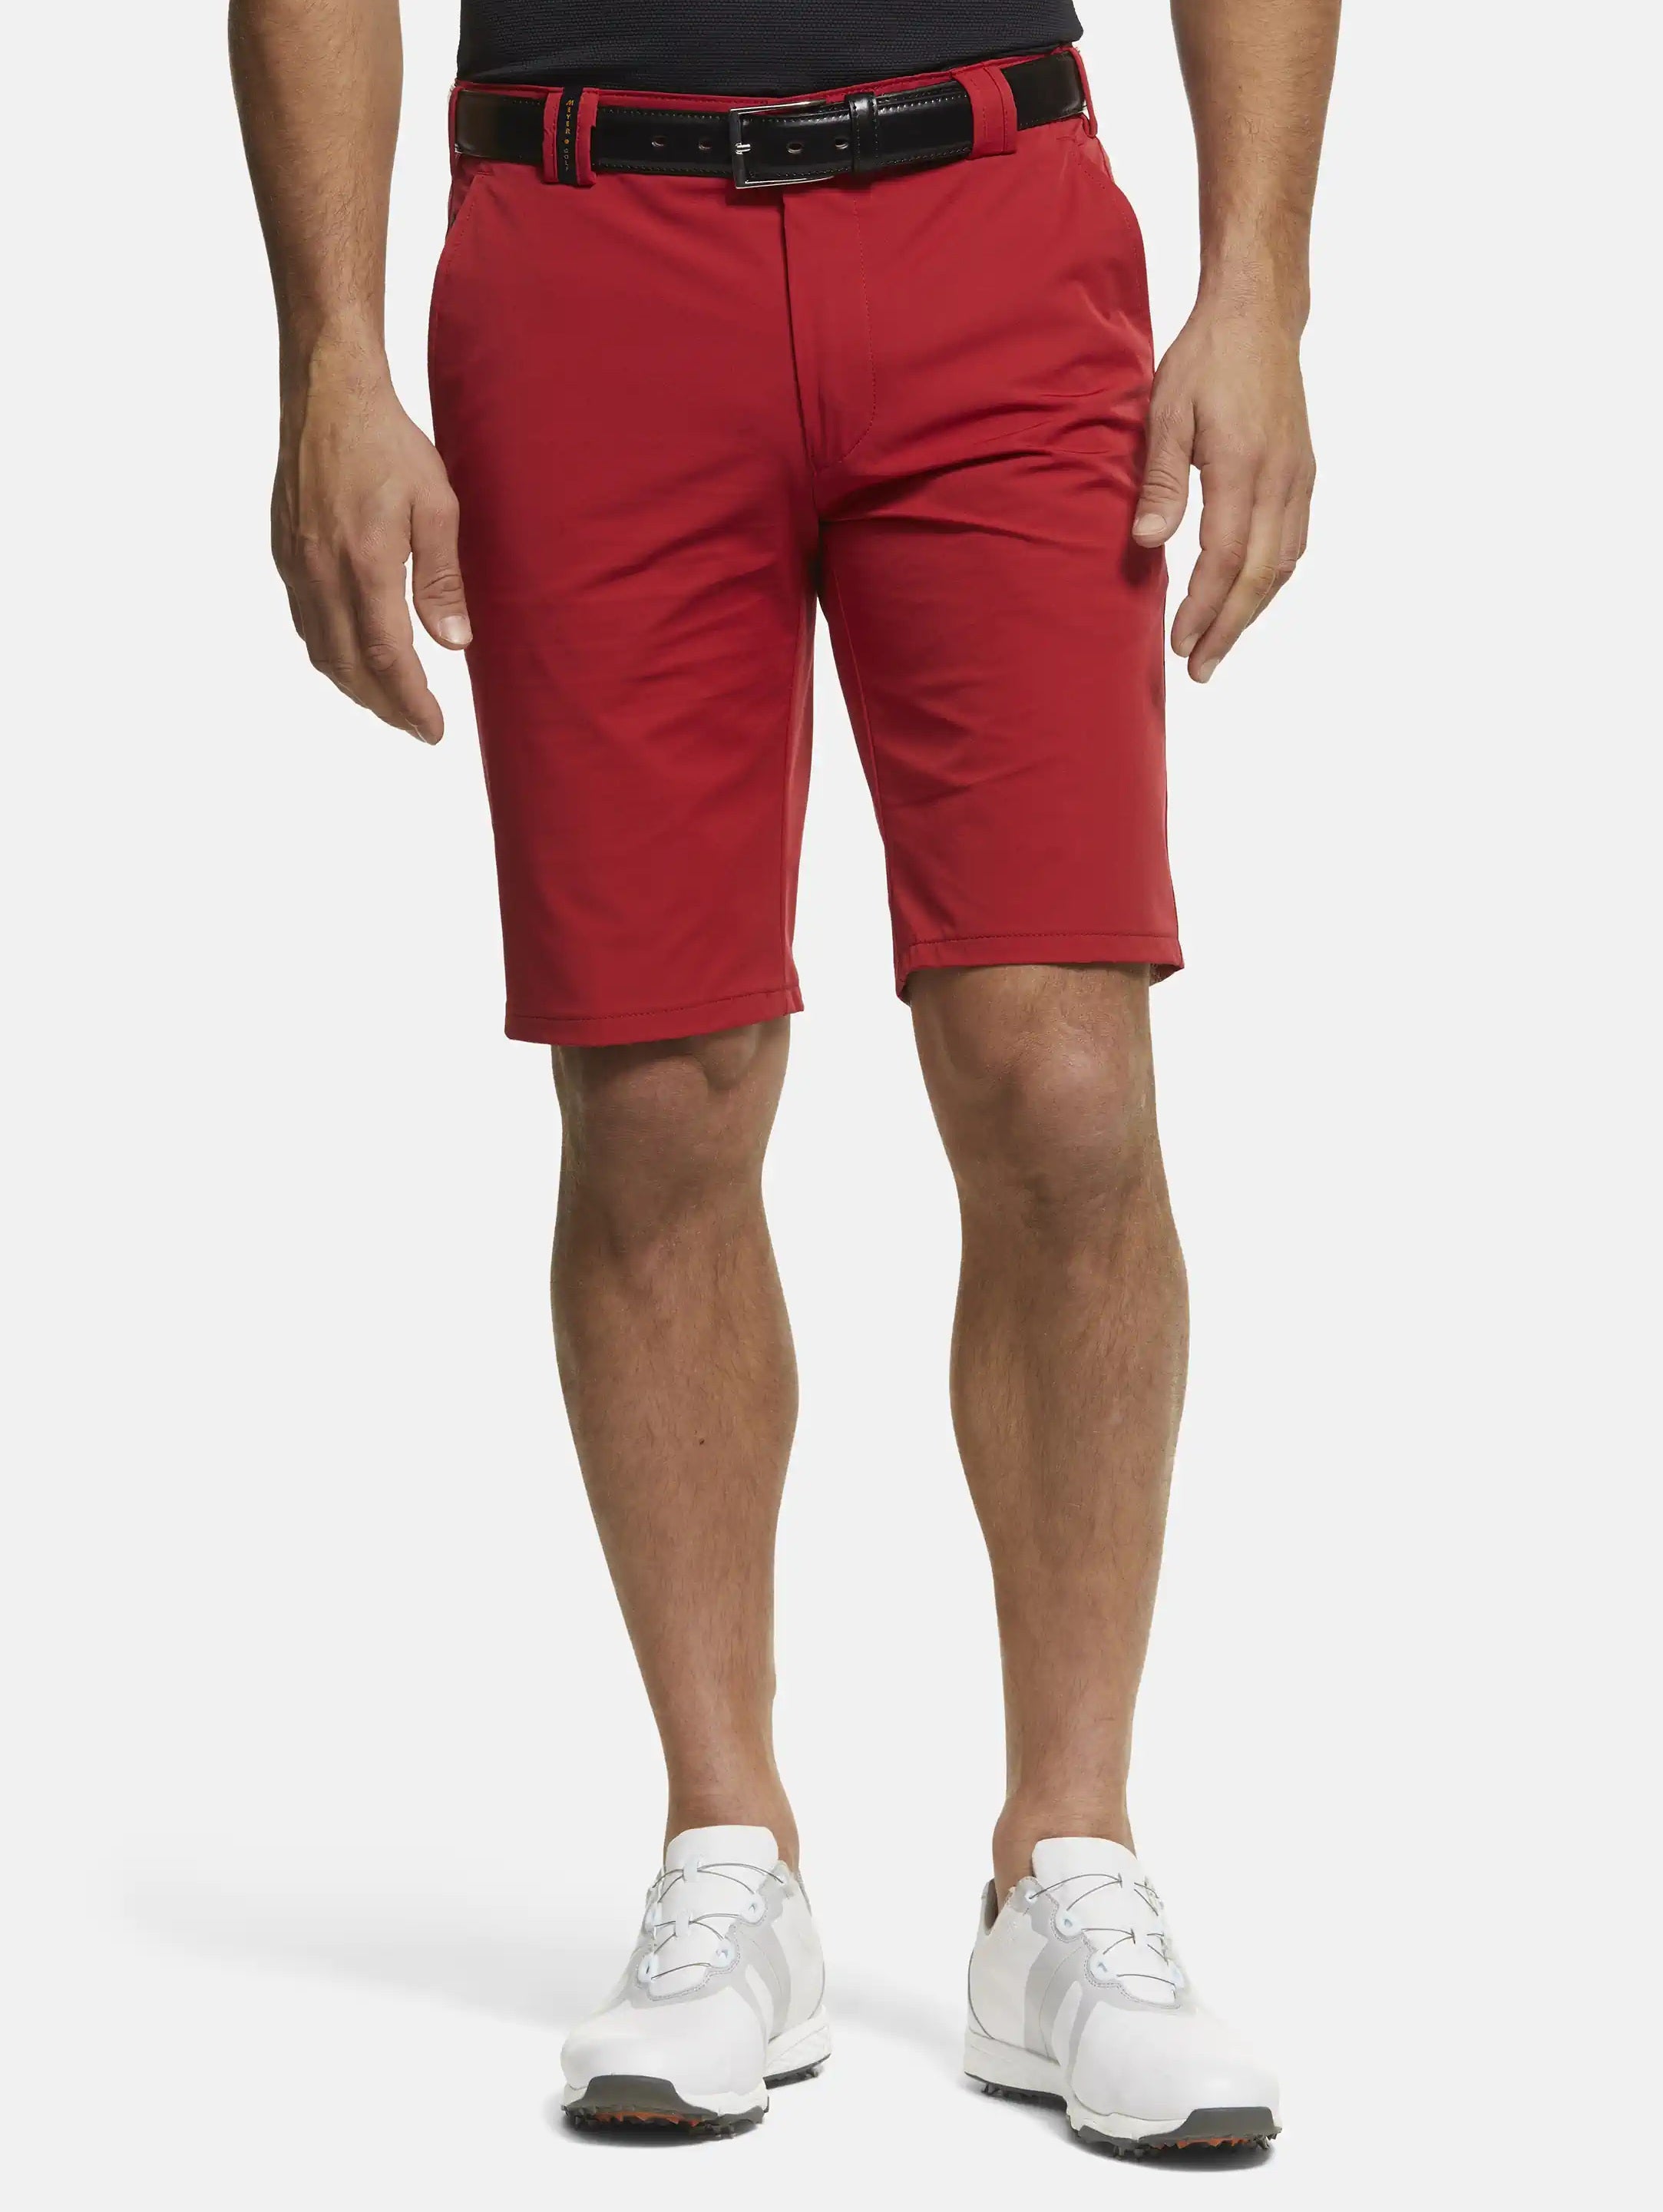 MEYER Golf Shorts - St. Andrews 8070 High Performance Cotton - Red